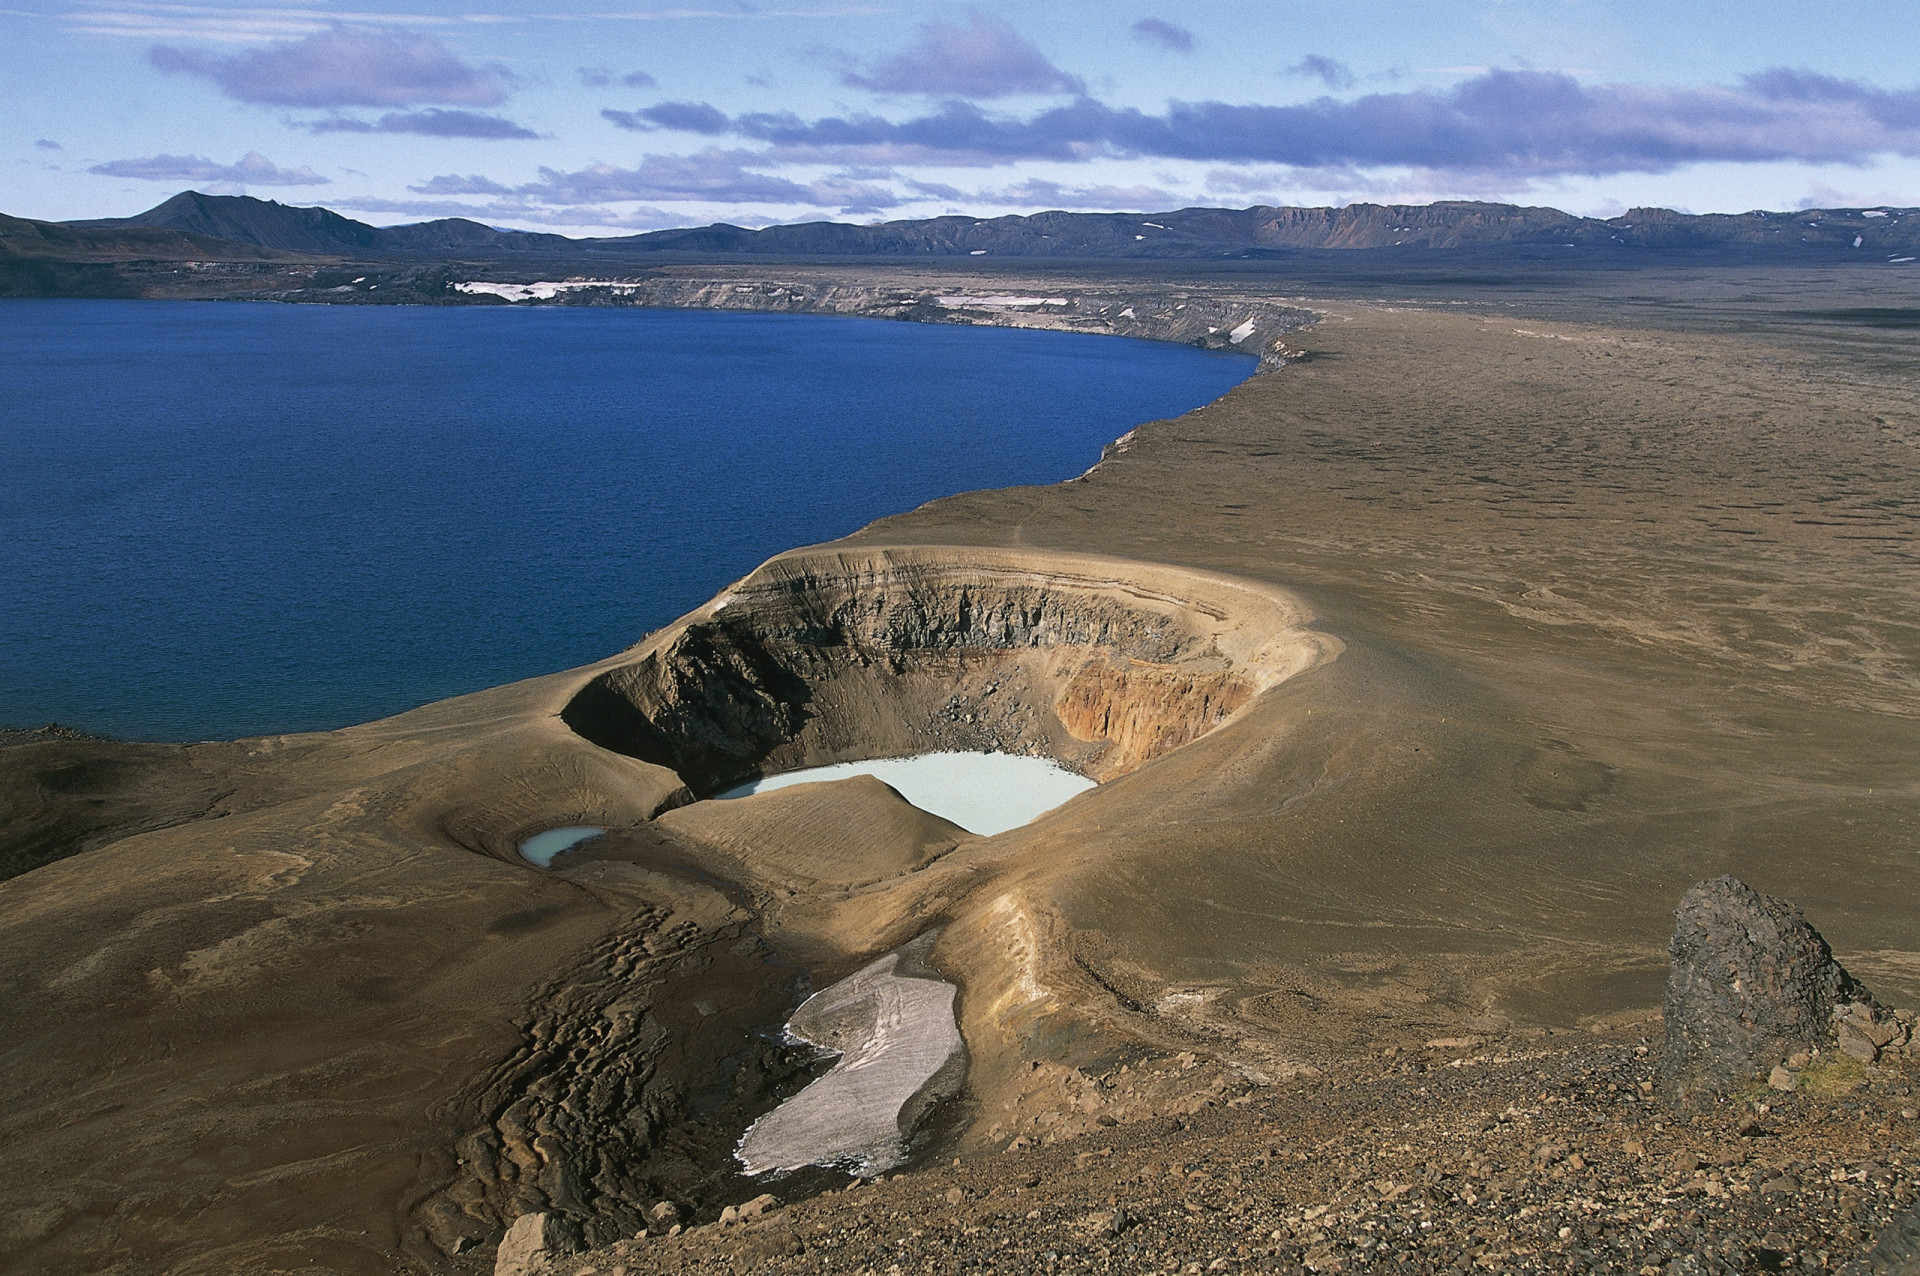 <p>Askja Volcano is an active volcano situated in a remote part of the central highlands of Iceland. Askja last erupted in 1961. The moonlike region was used by NASA during training for the Apollo program to prepare astronauts for the lunar missions.</p><p>You may also like:<a href="https://www.starsinsider.com/n/255061?utm_source=msn.com&utm_medium=display&utm_campaign=referral_description&utm_content=701215en-us"> How much do Australian police make?</a></p>